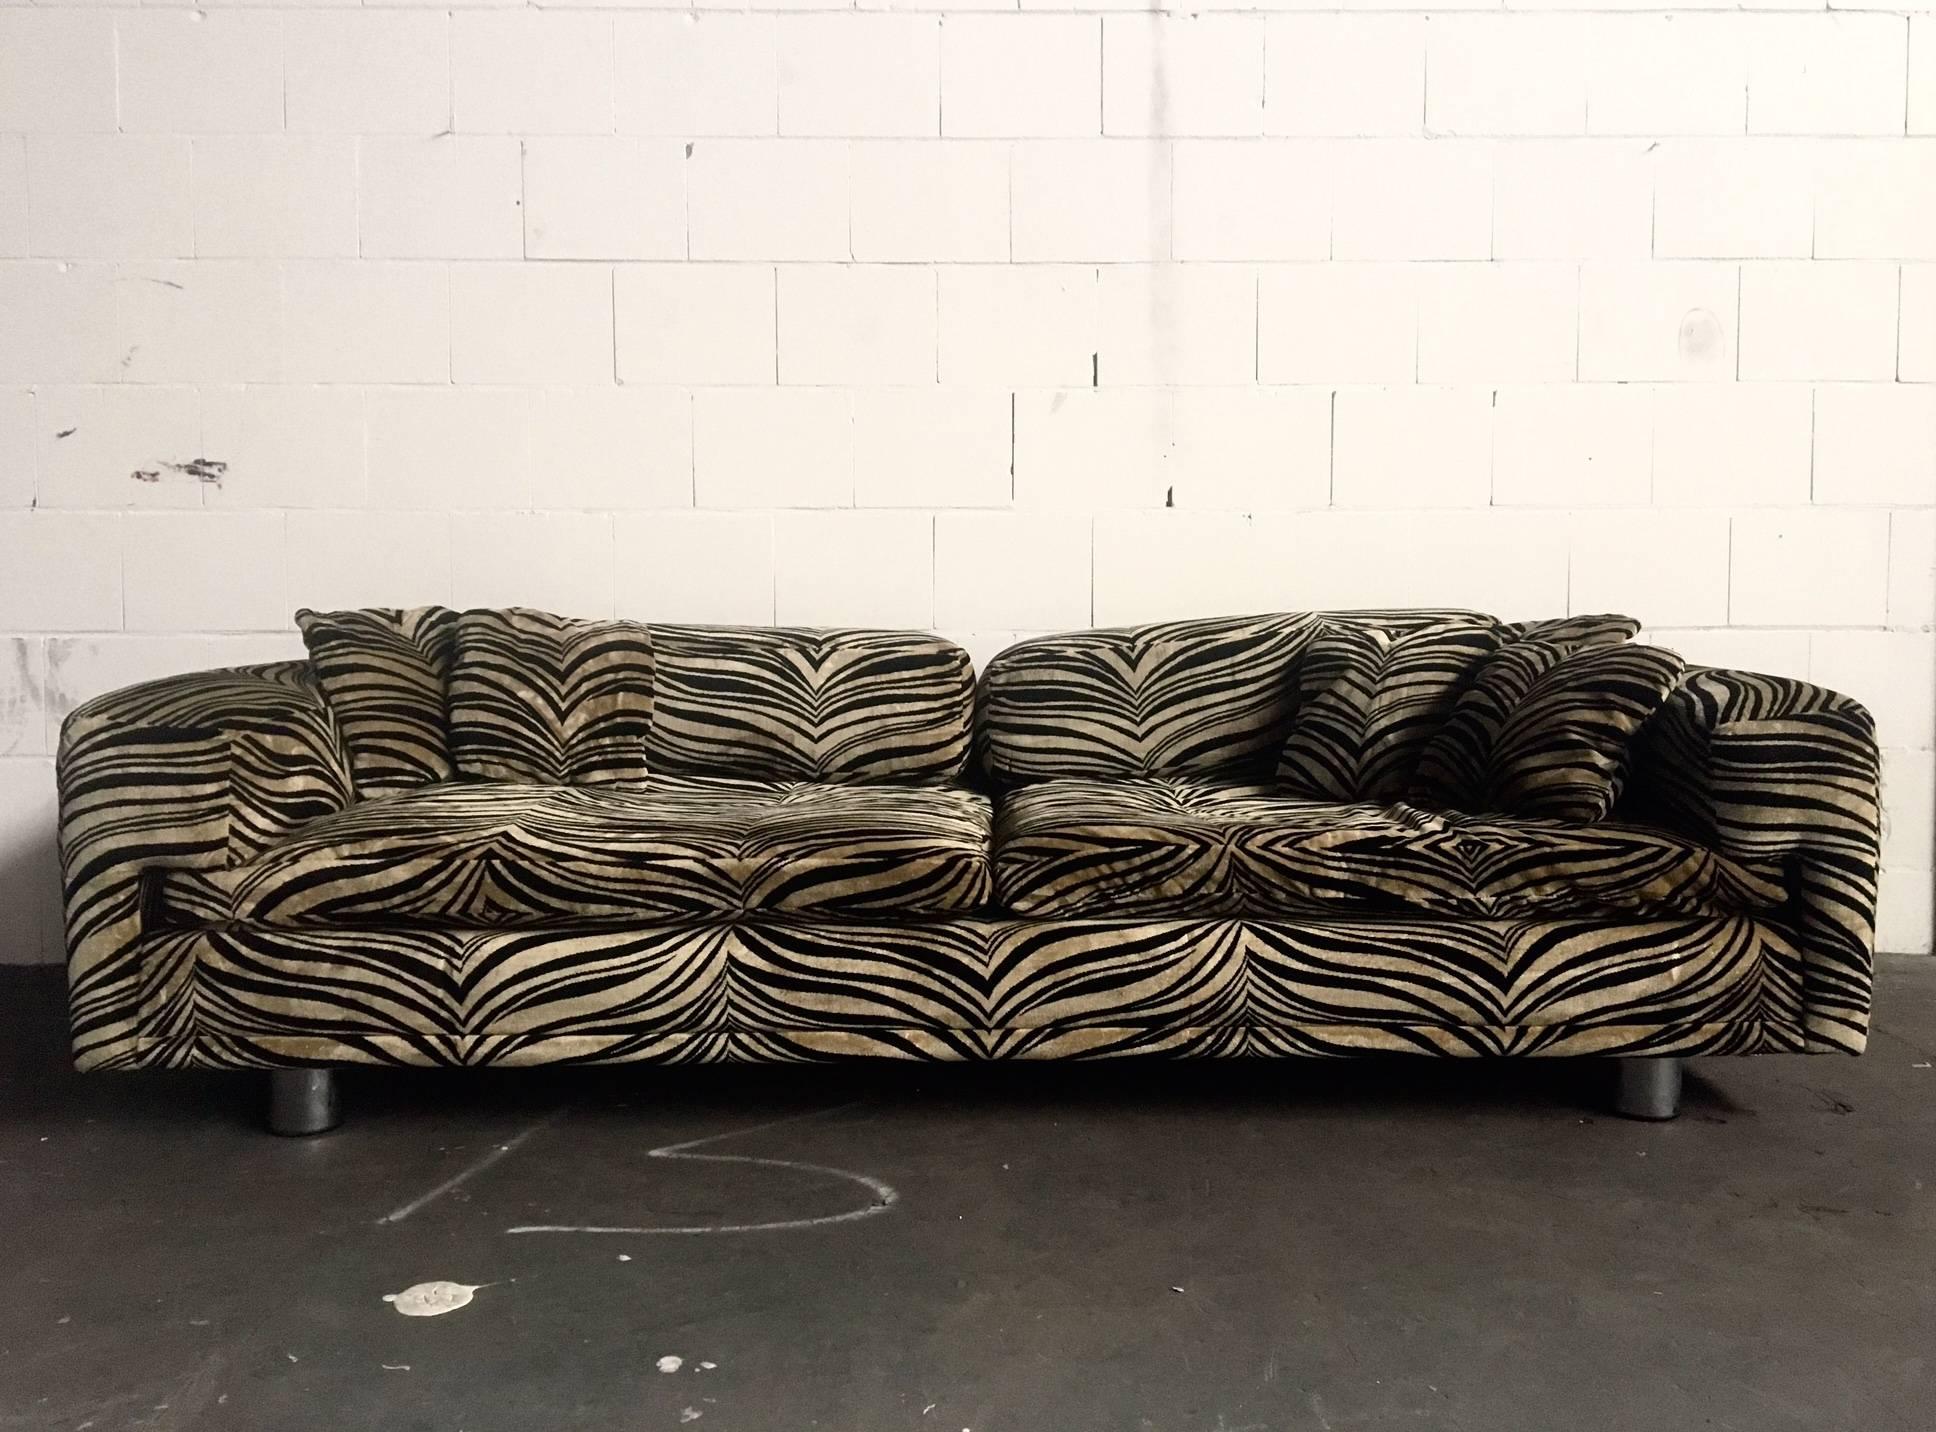 This stunning rectangular sofa comes with a soft and shiny animal print. It has huge soft cushions, perfect for lounging in. Also a set of five small cushions is included. The feet are in metal with wood. Fits very well in a Hollywood Regency style